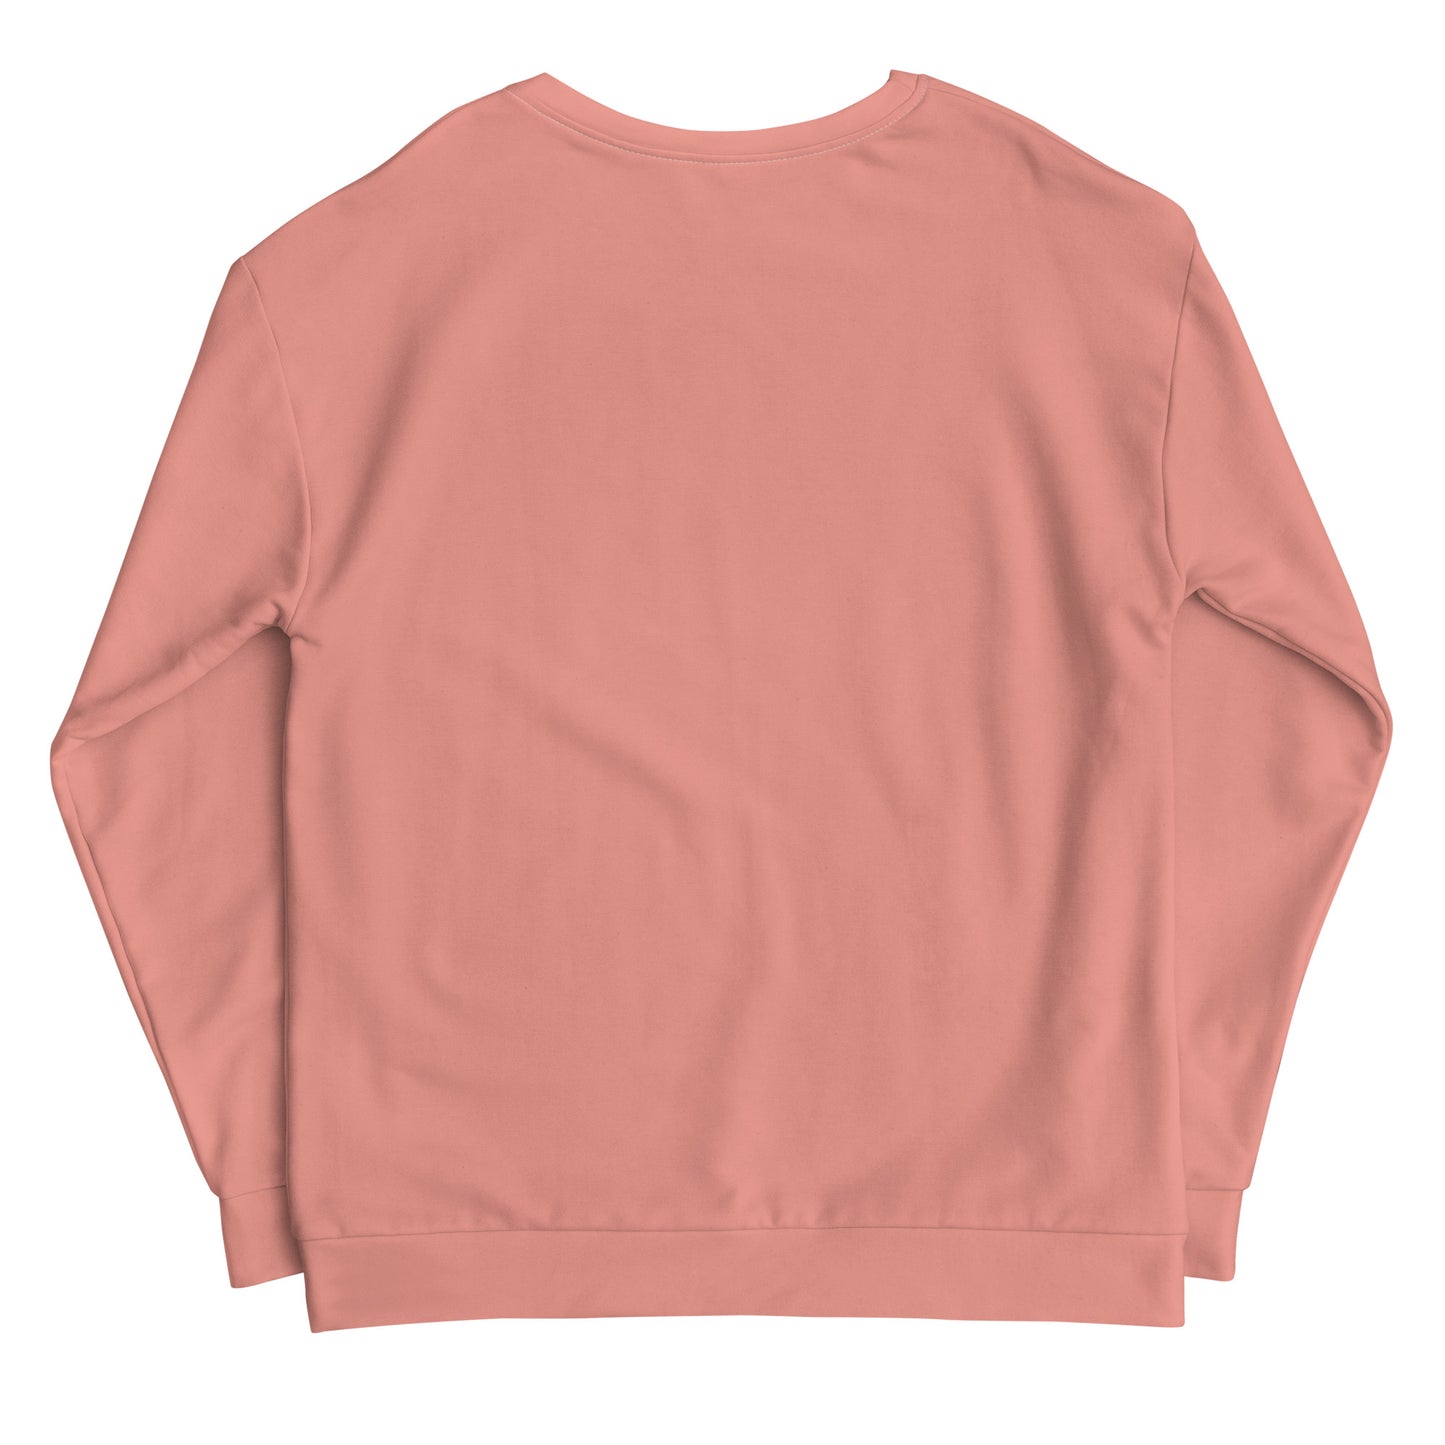 Coral Pink Climate Change Global Warming Statement - Sustainably Made Sweatshirt